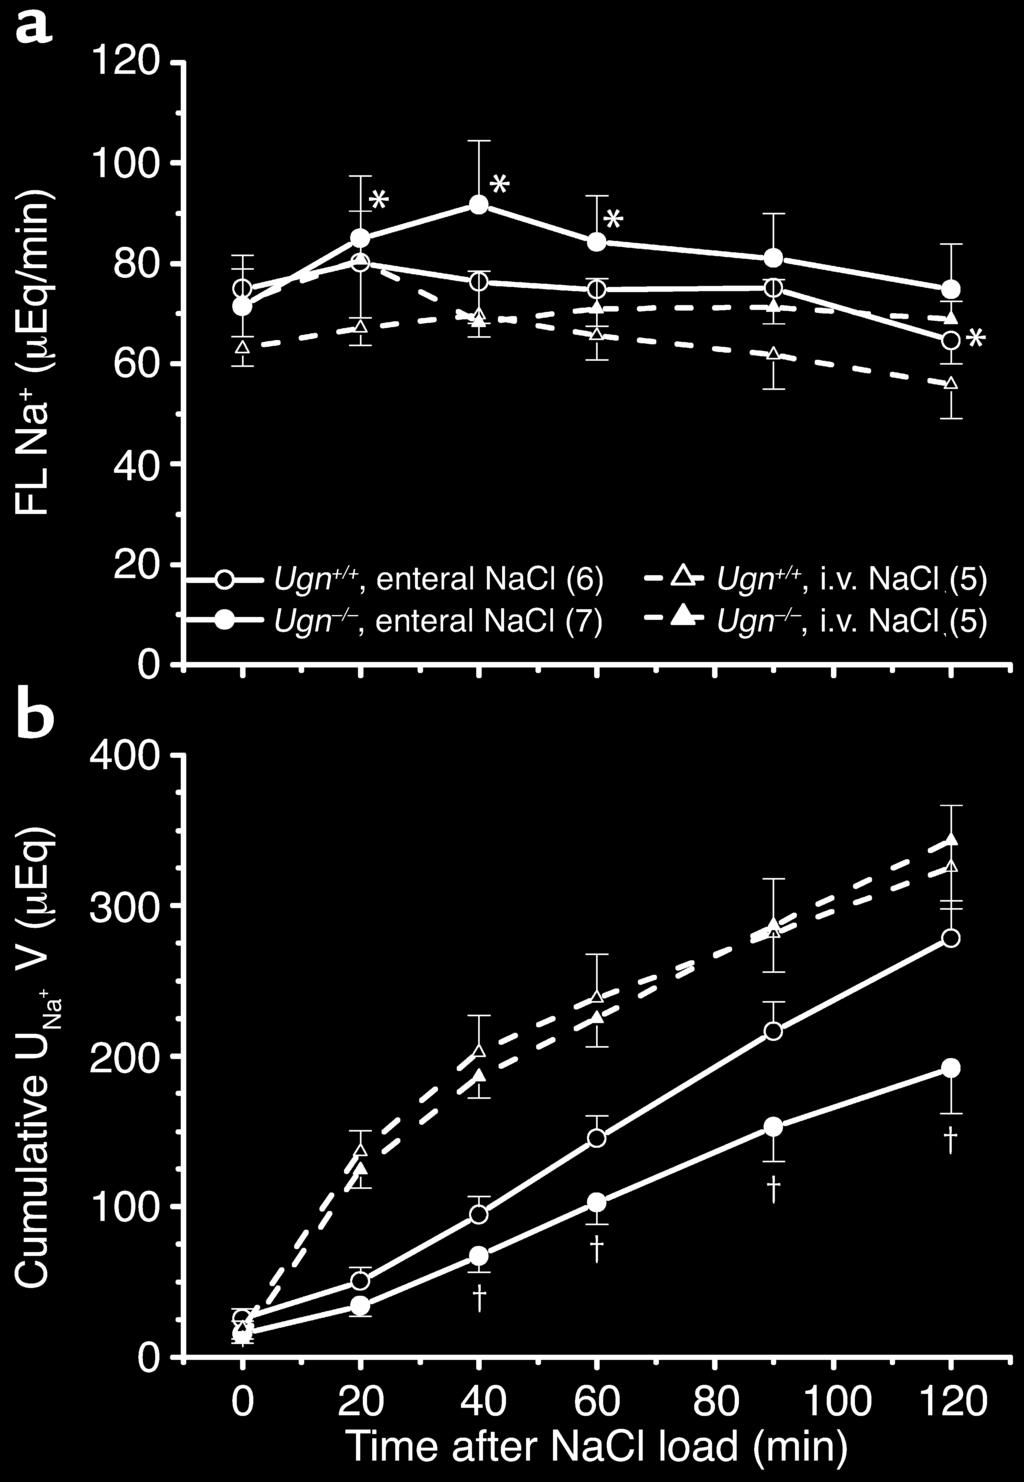 Figure 7 Renal clearance measurements from Ugn +/+ and Ugn / given either enteral NaCl load or intravenous NaCl load; total amount of Na + was 300 µeq delivered in 1 ml of fluid over 1 to 2 minutes.